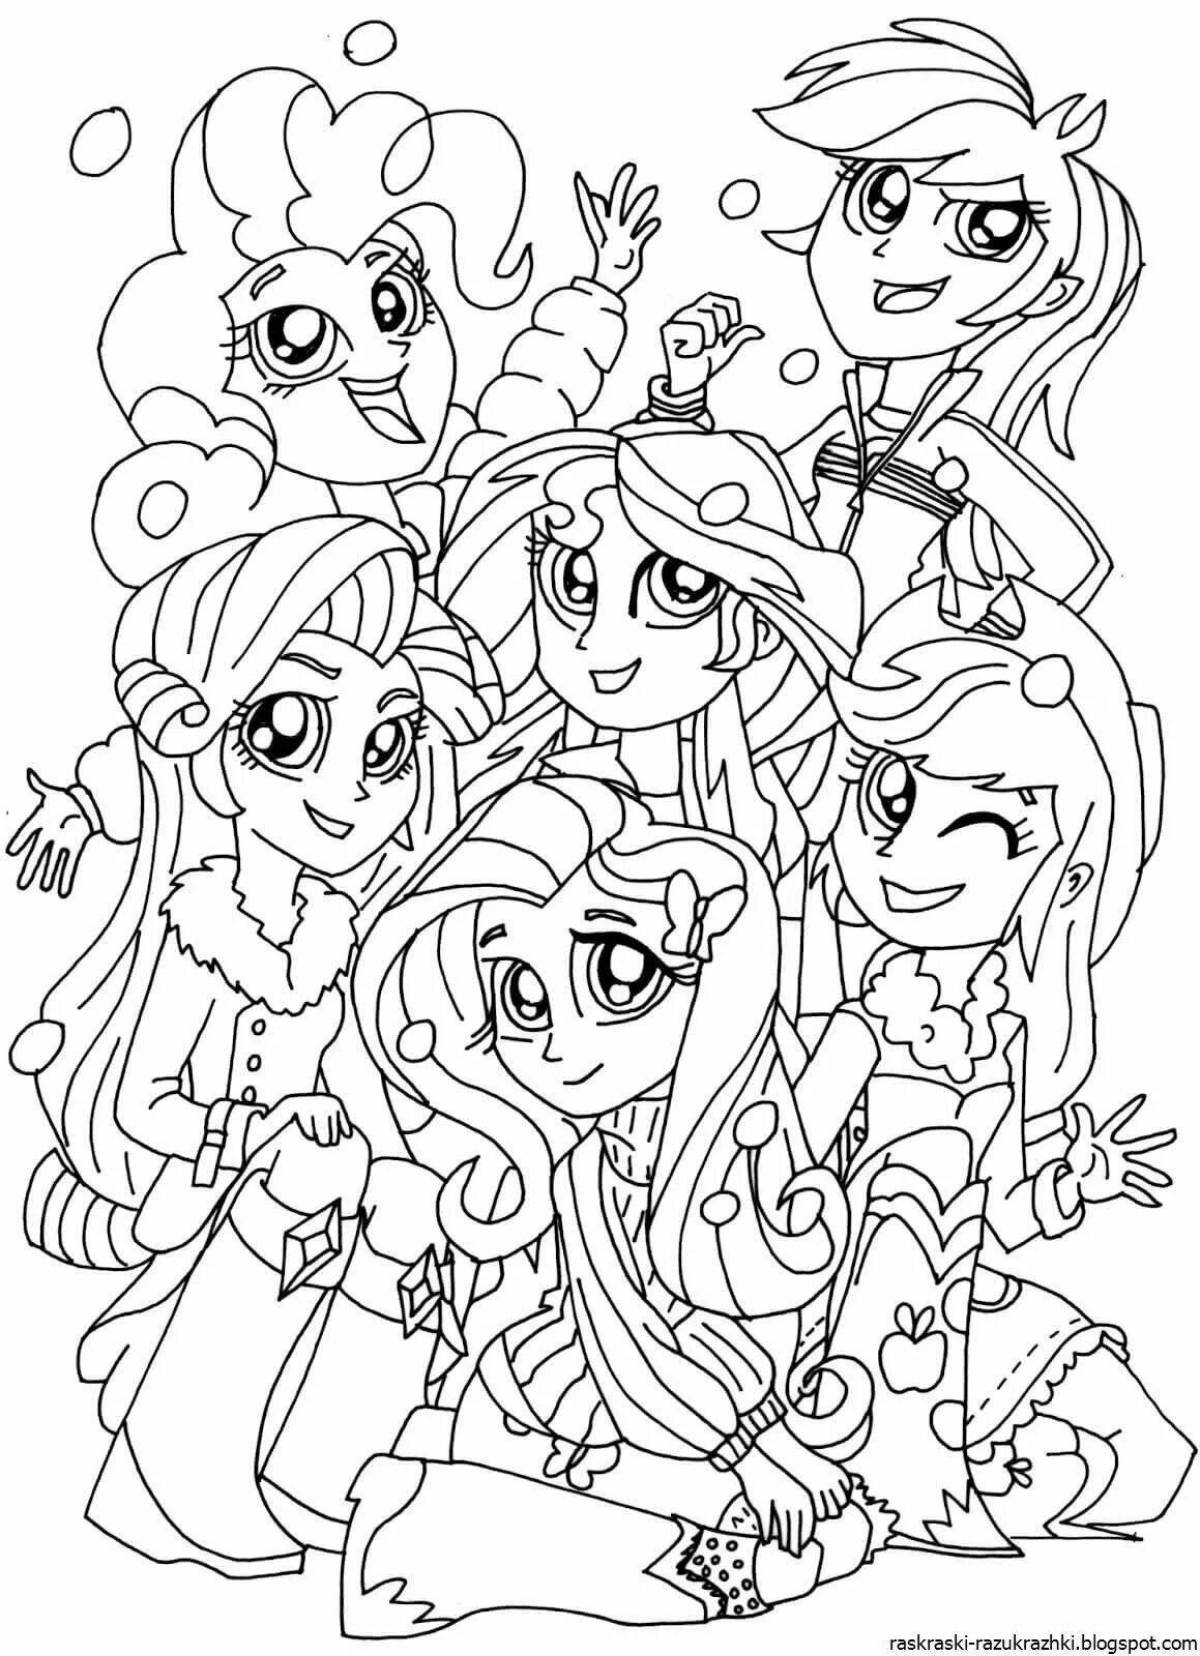 My little pony girls wonderful coloring pages for kids